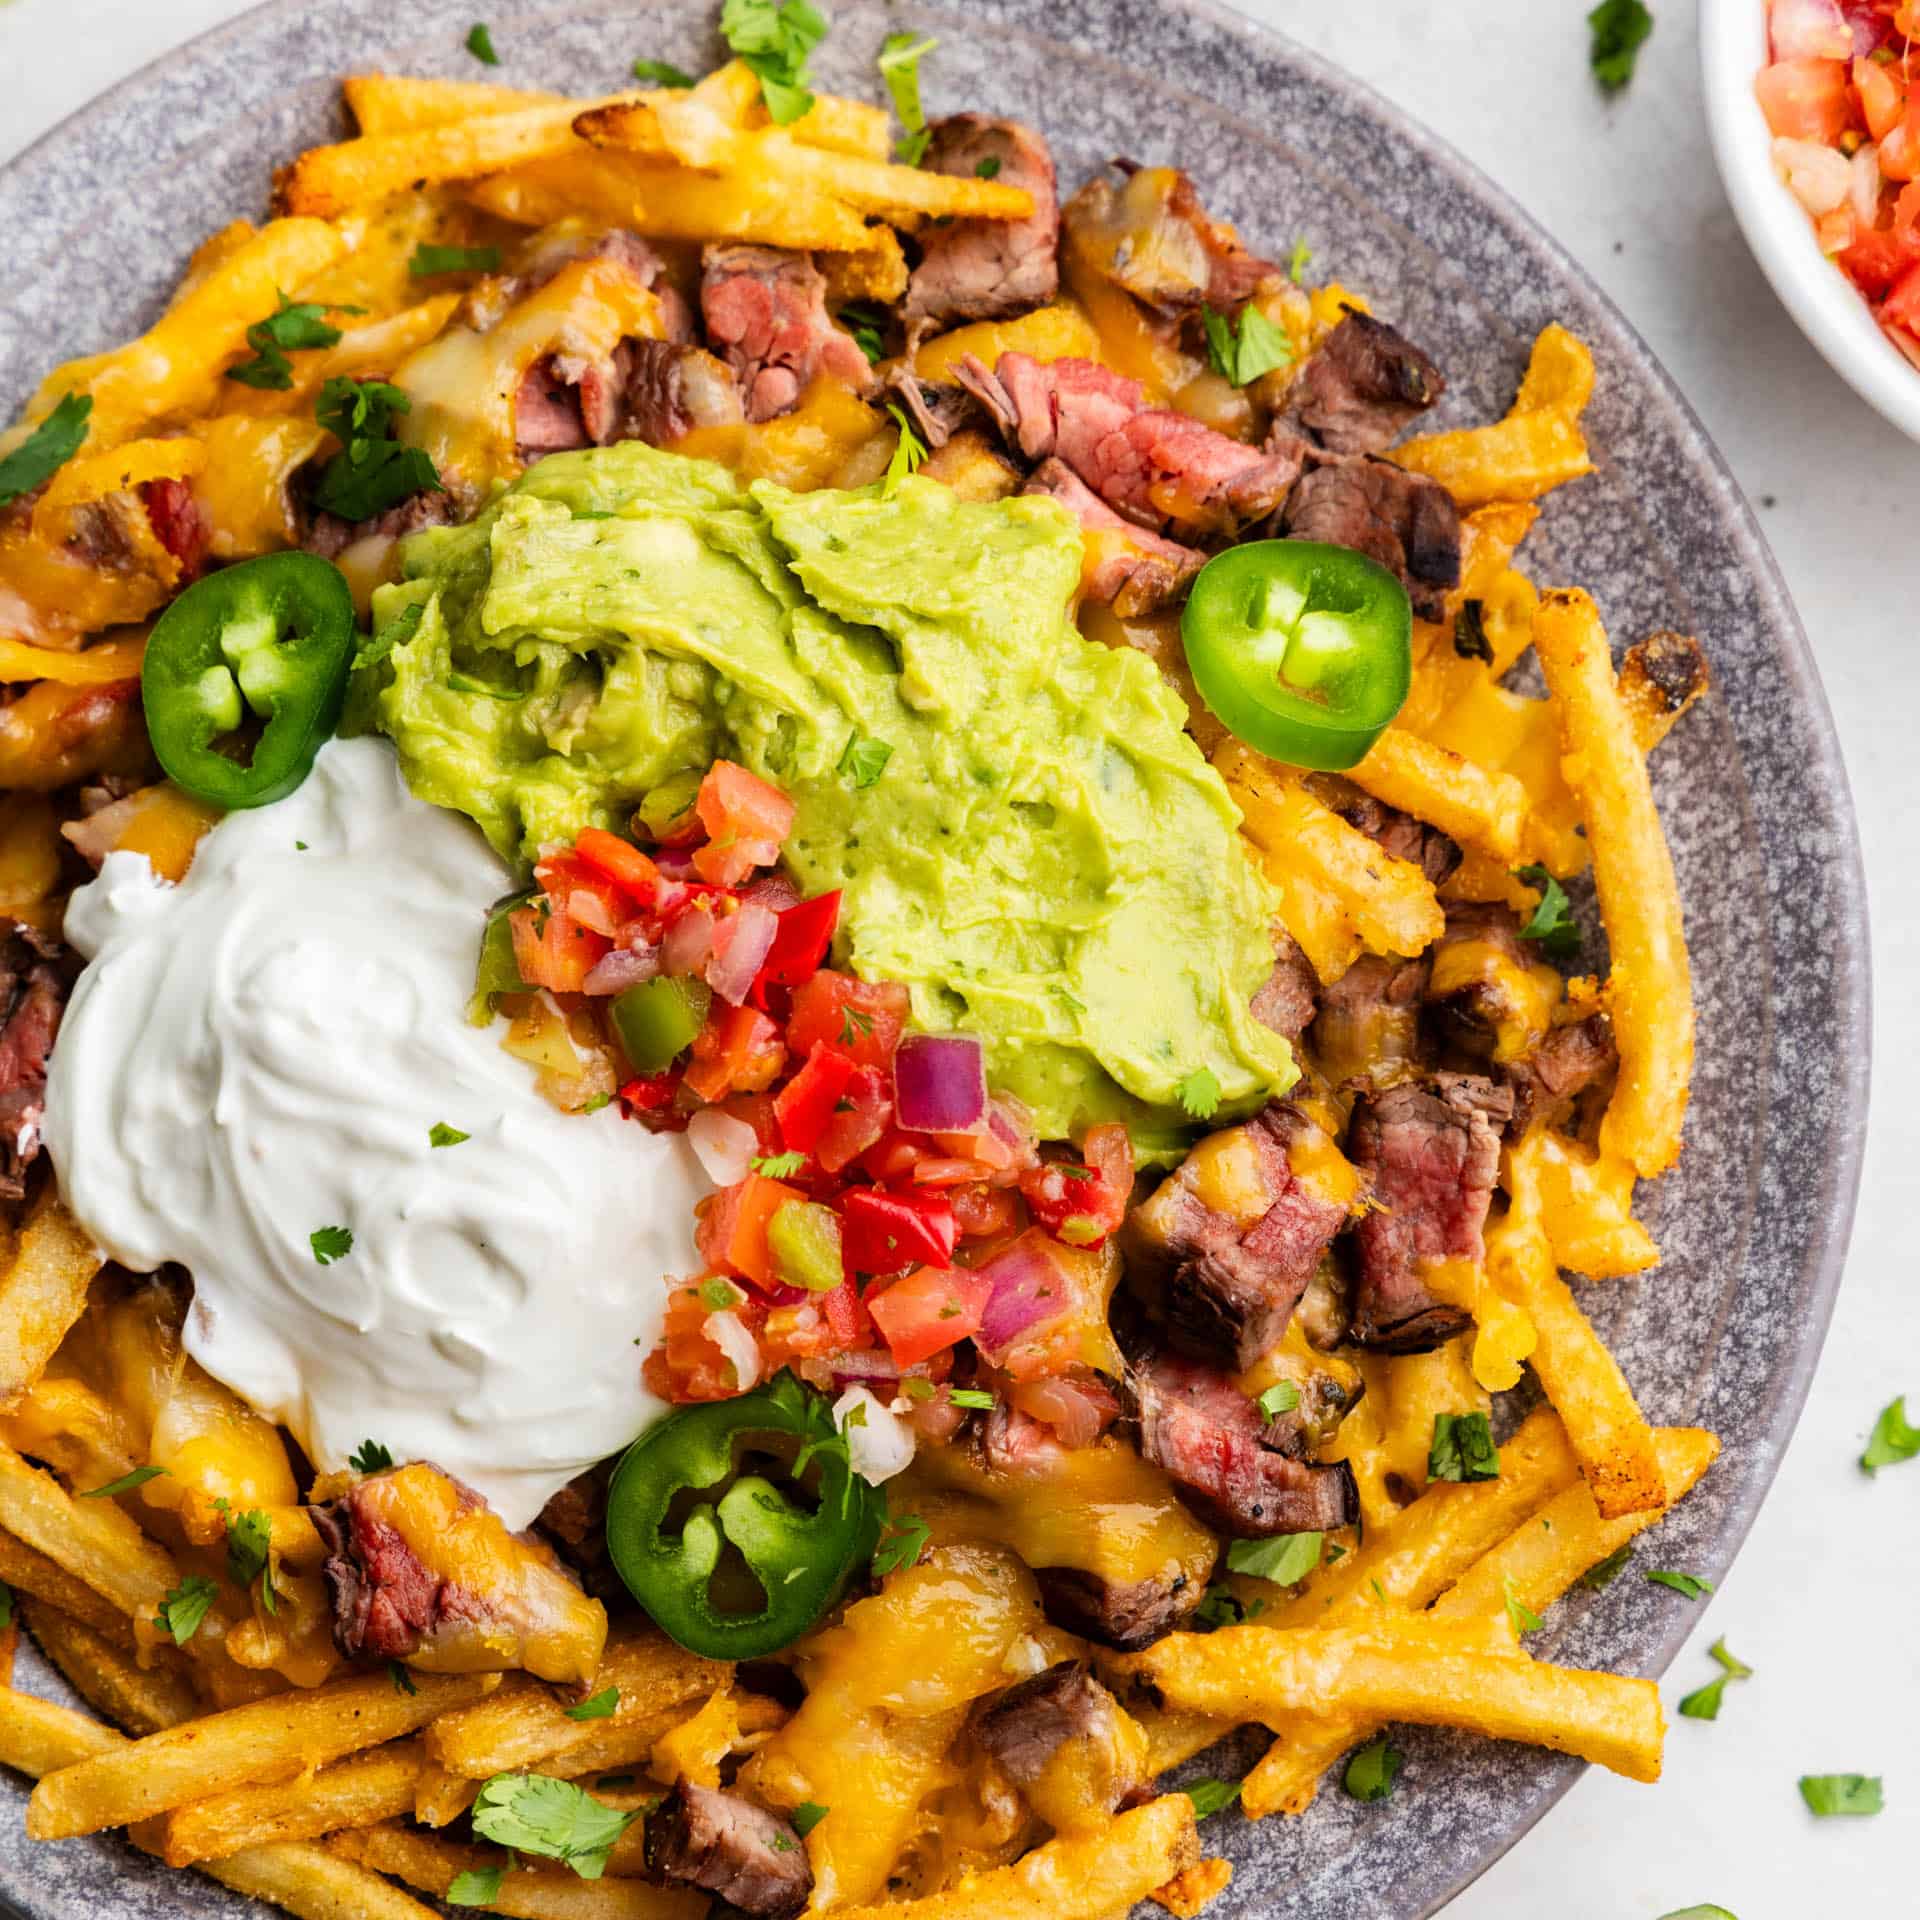 An overhead view of a plate of carne asada fries loaded with pico, guacamole, and sour cream.